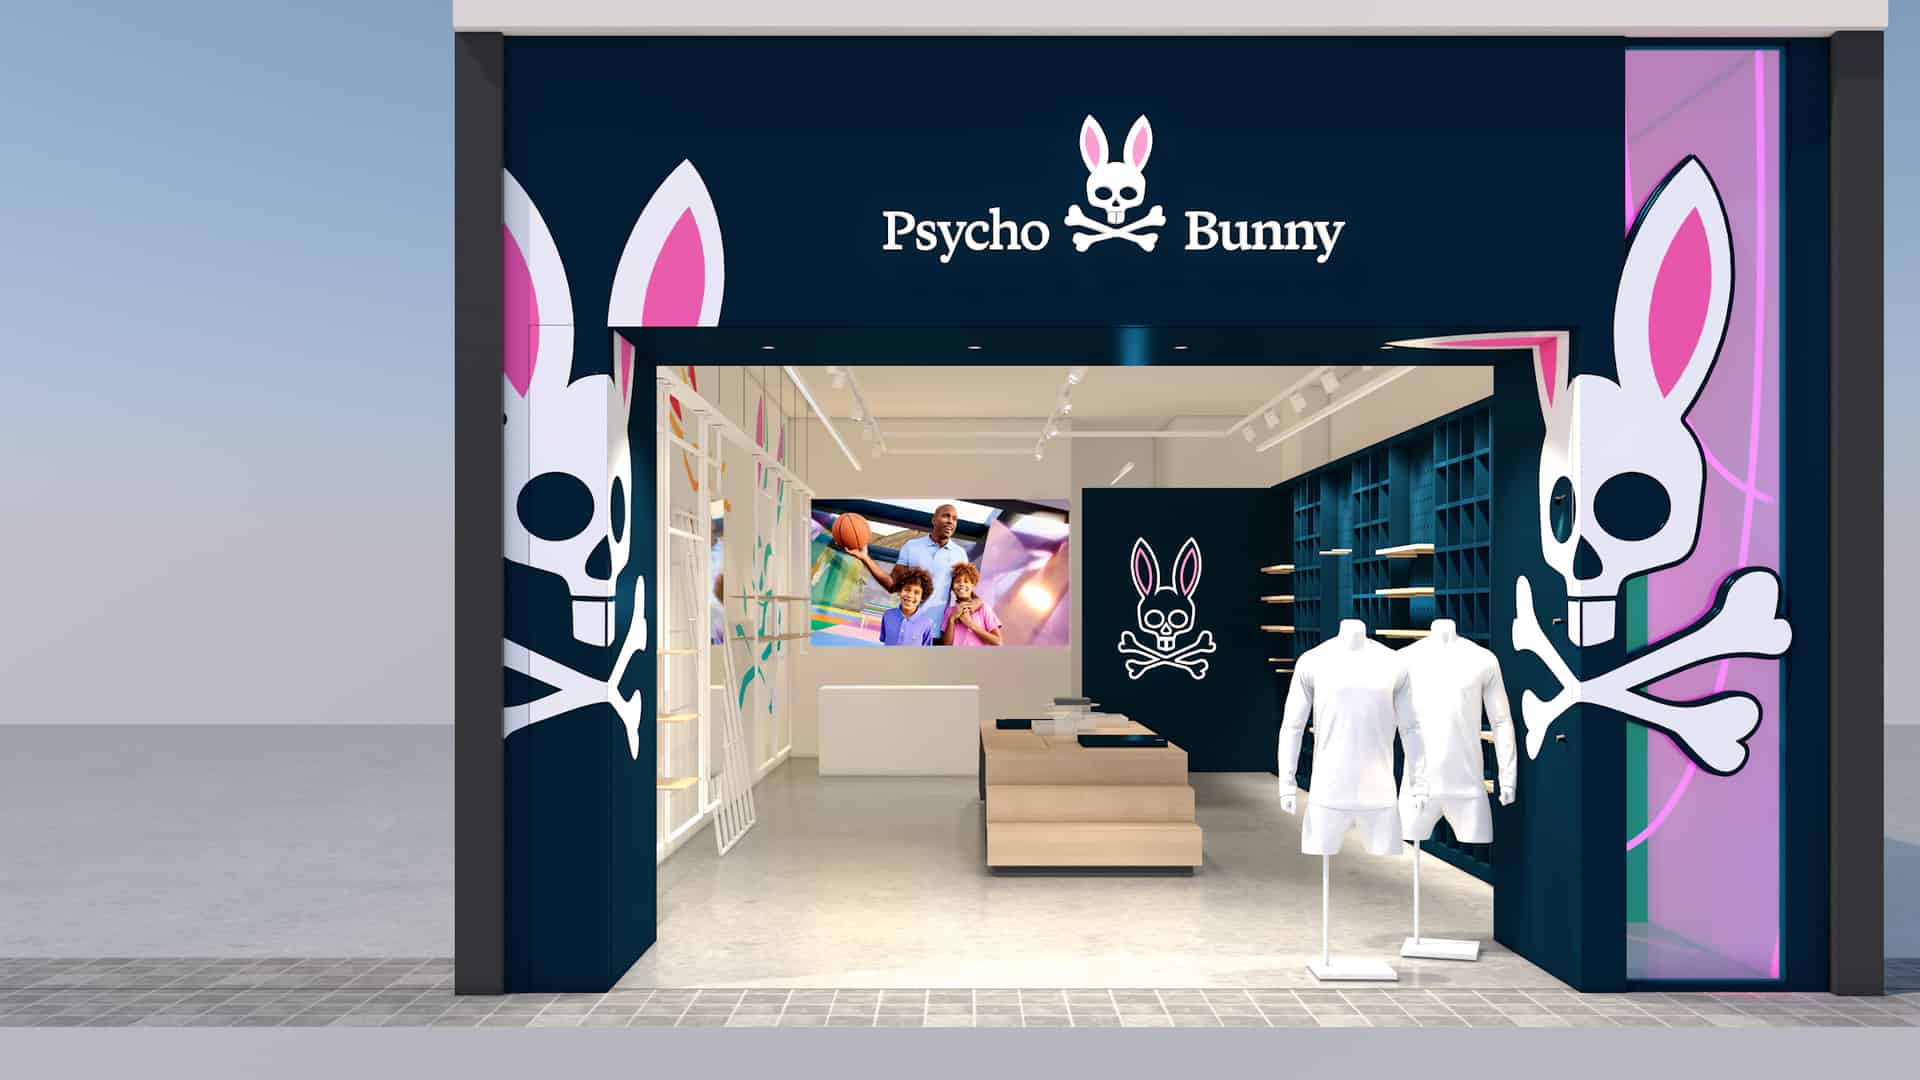 Psycho Bunny at Woodfield Mall - A Shopping Center in Schaumburg